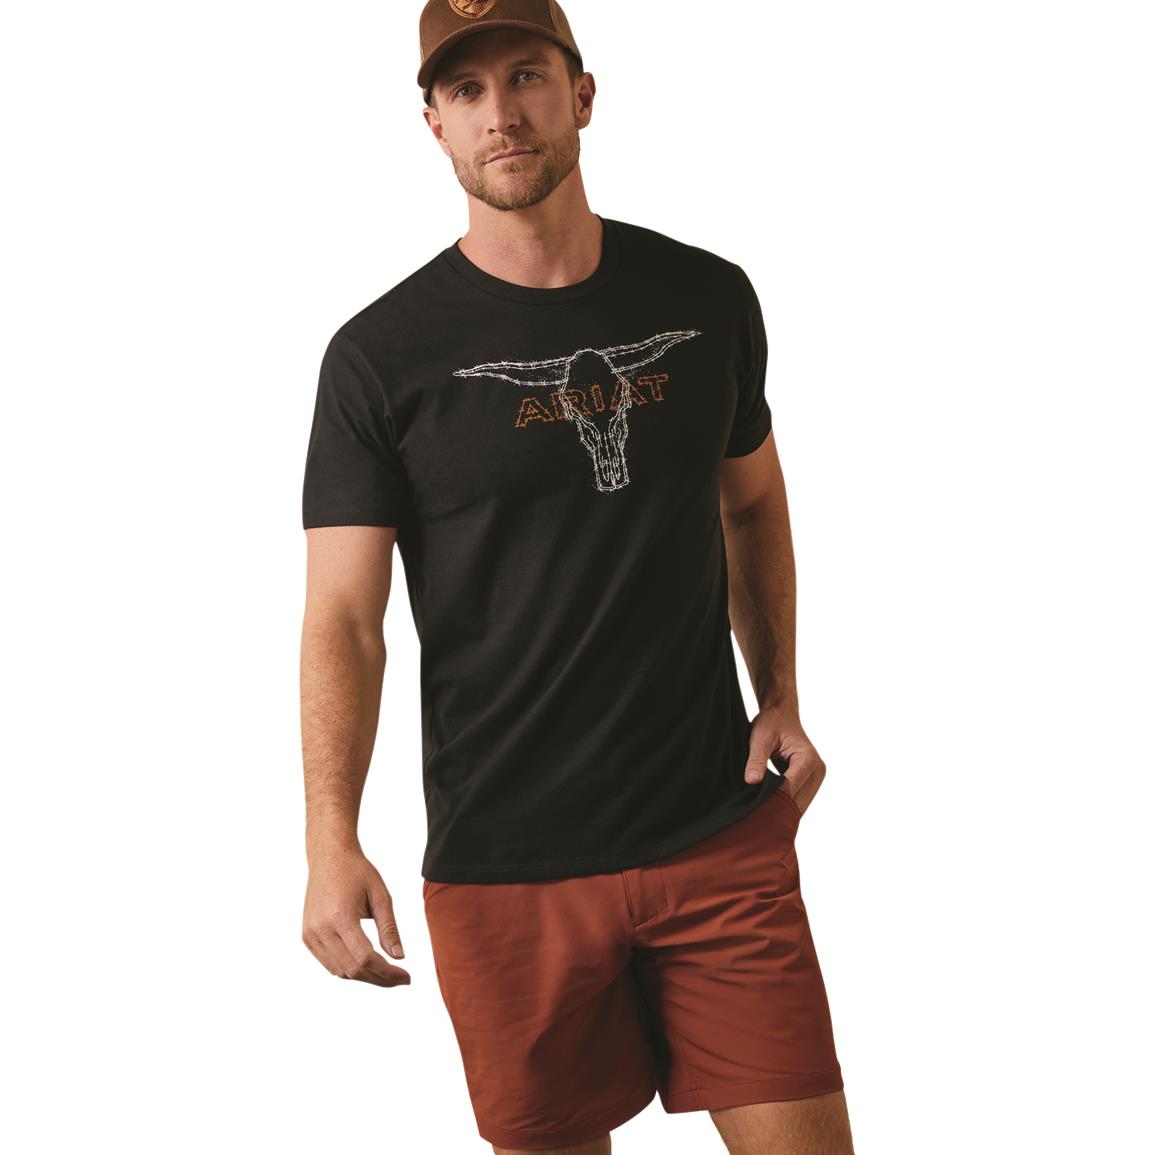 Ariat Barbed Wire Steer T-Shirt, Black